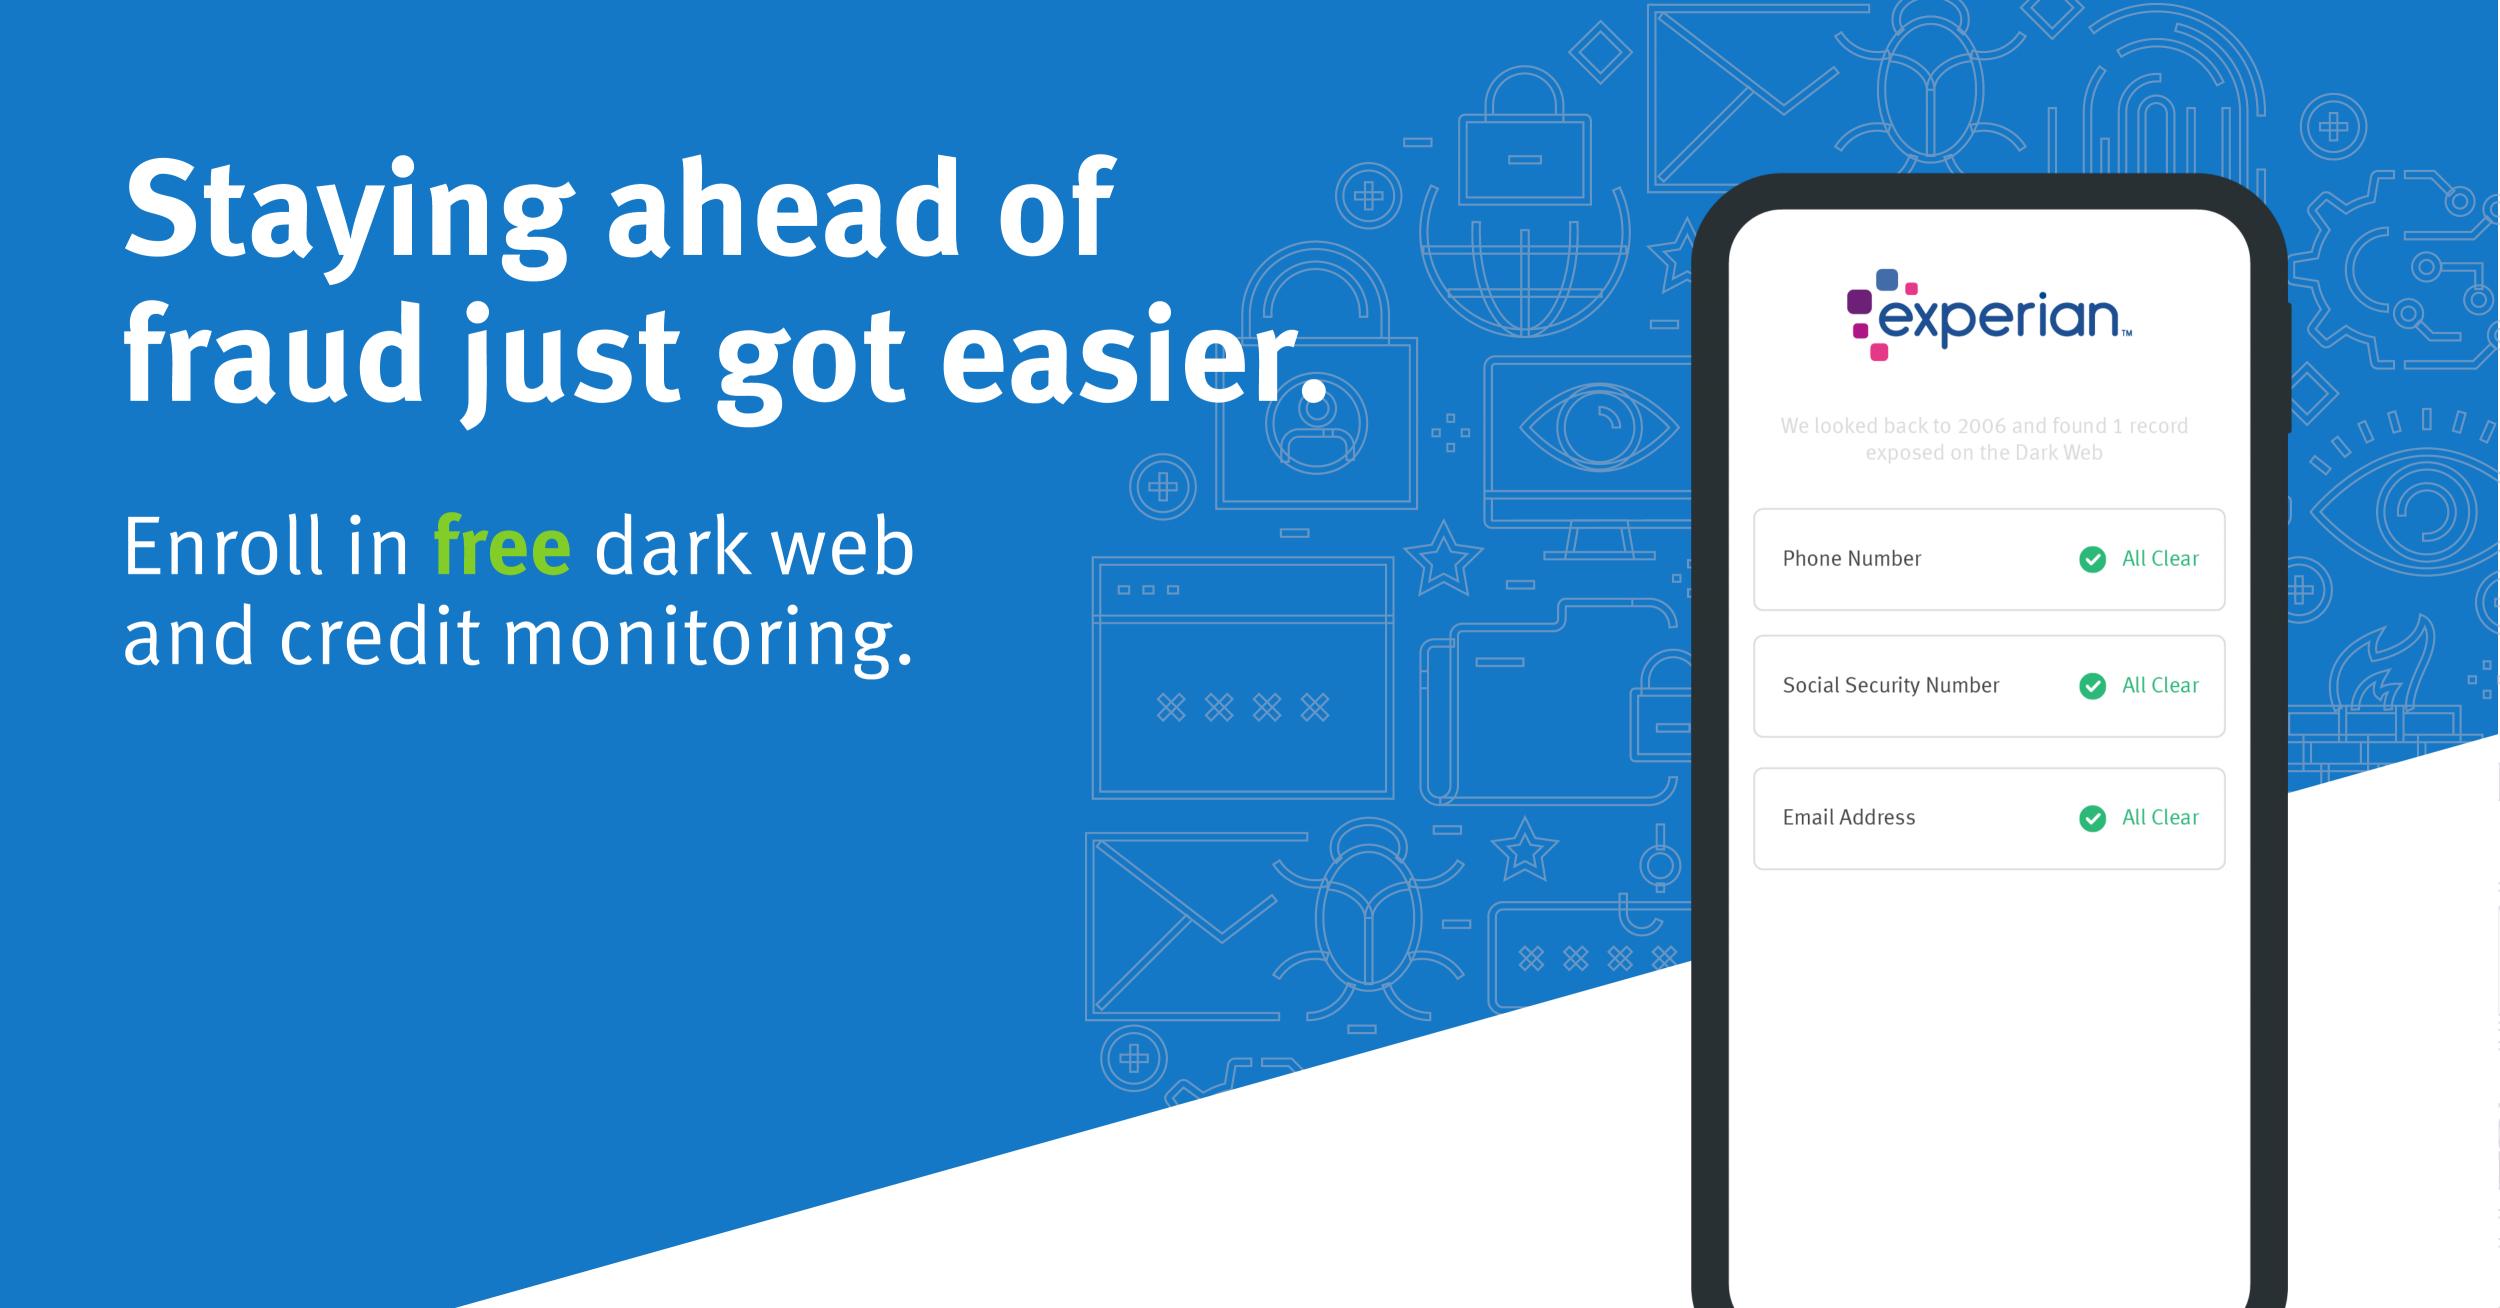 Staying ahead of fraud just got easier. Enroll in free dark web and credit monitoring.